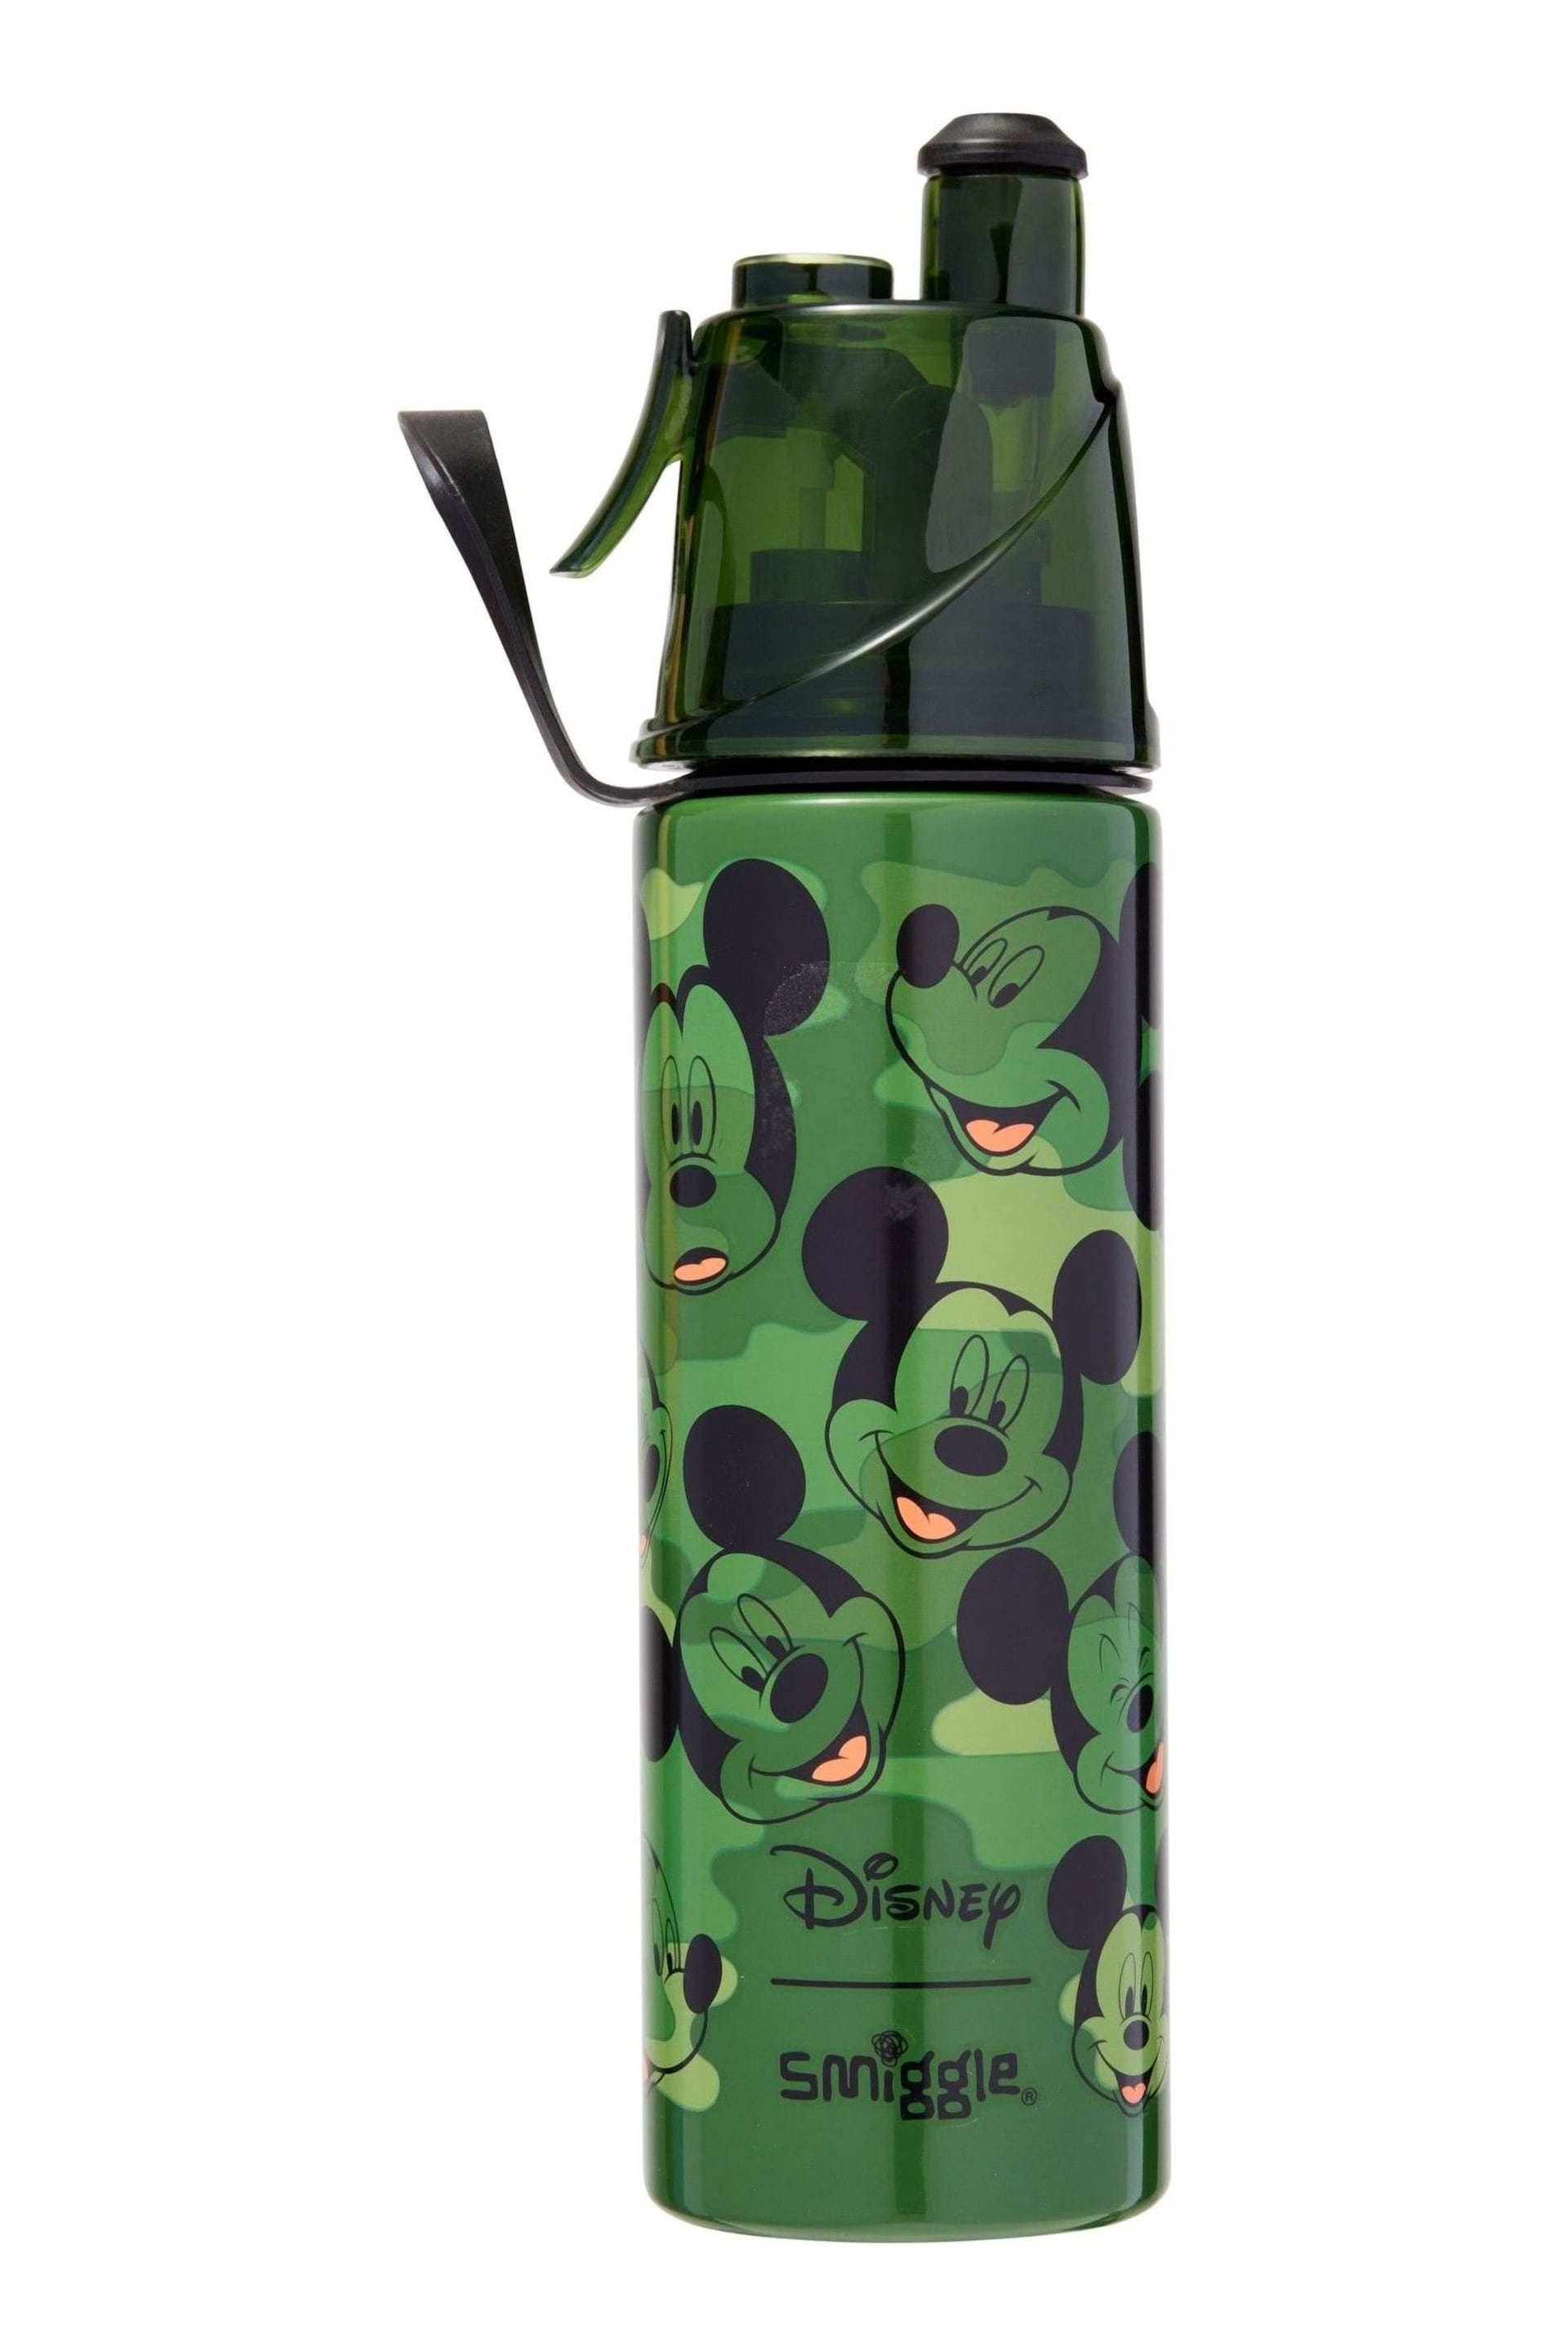 Smiggle Green Mickey Mouse Insulated Stainless Steel Spritz Drink Bottle 500ml - Image 1 of 1